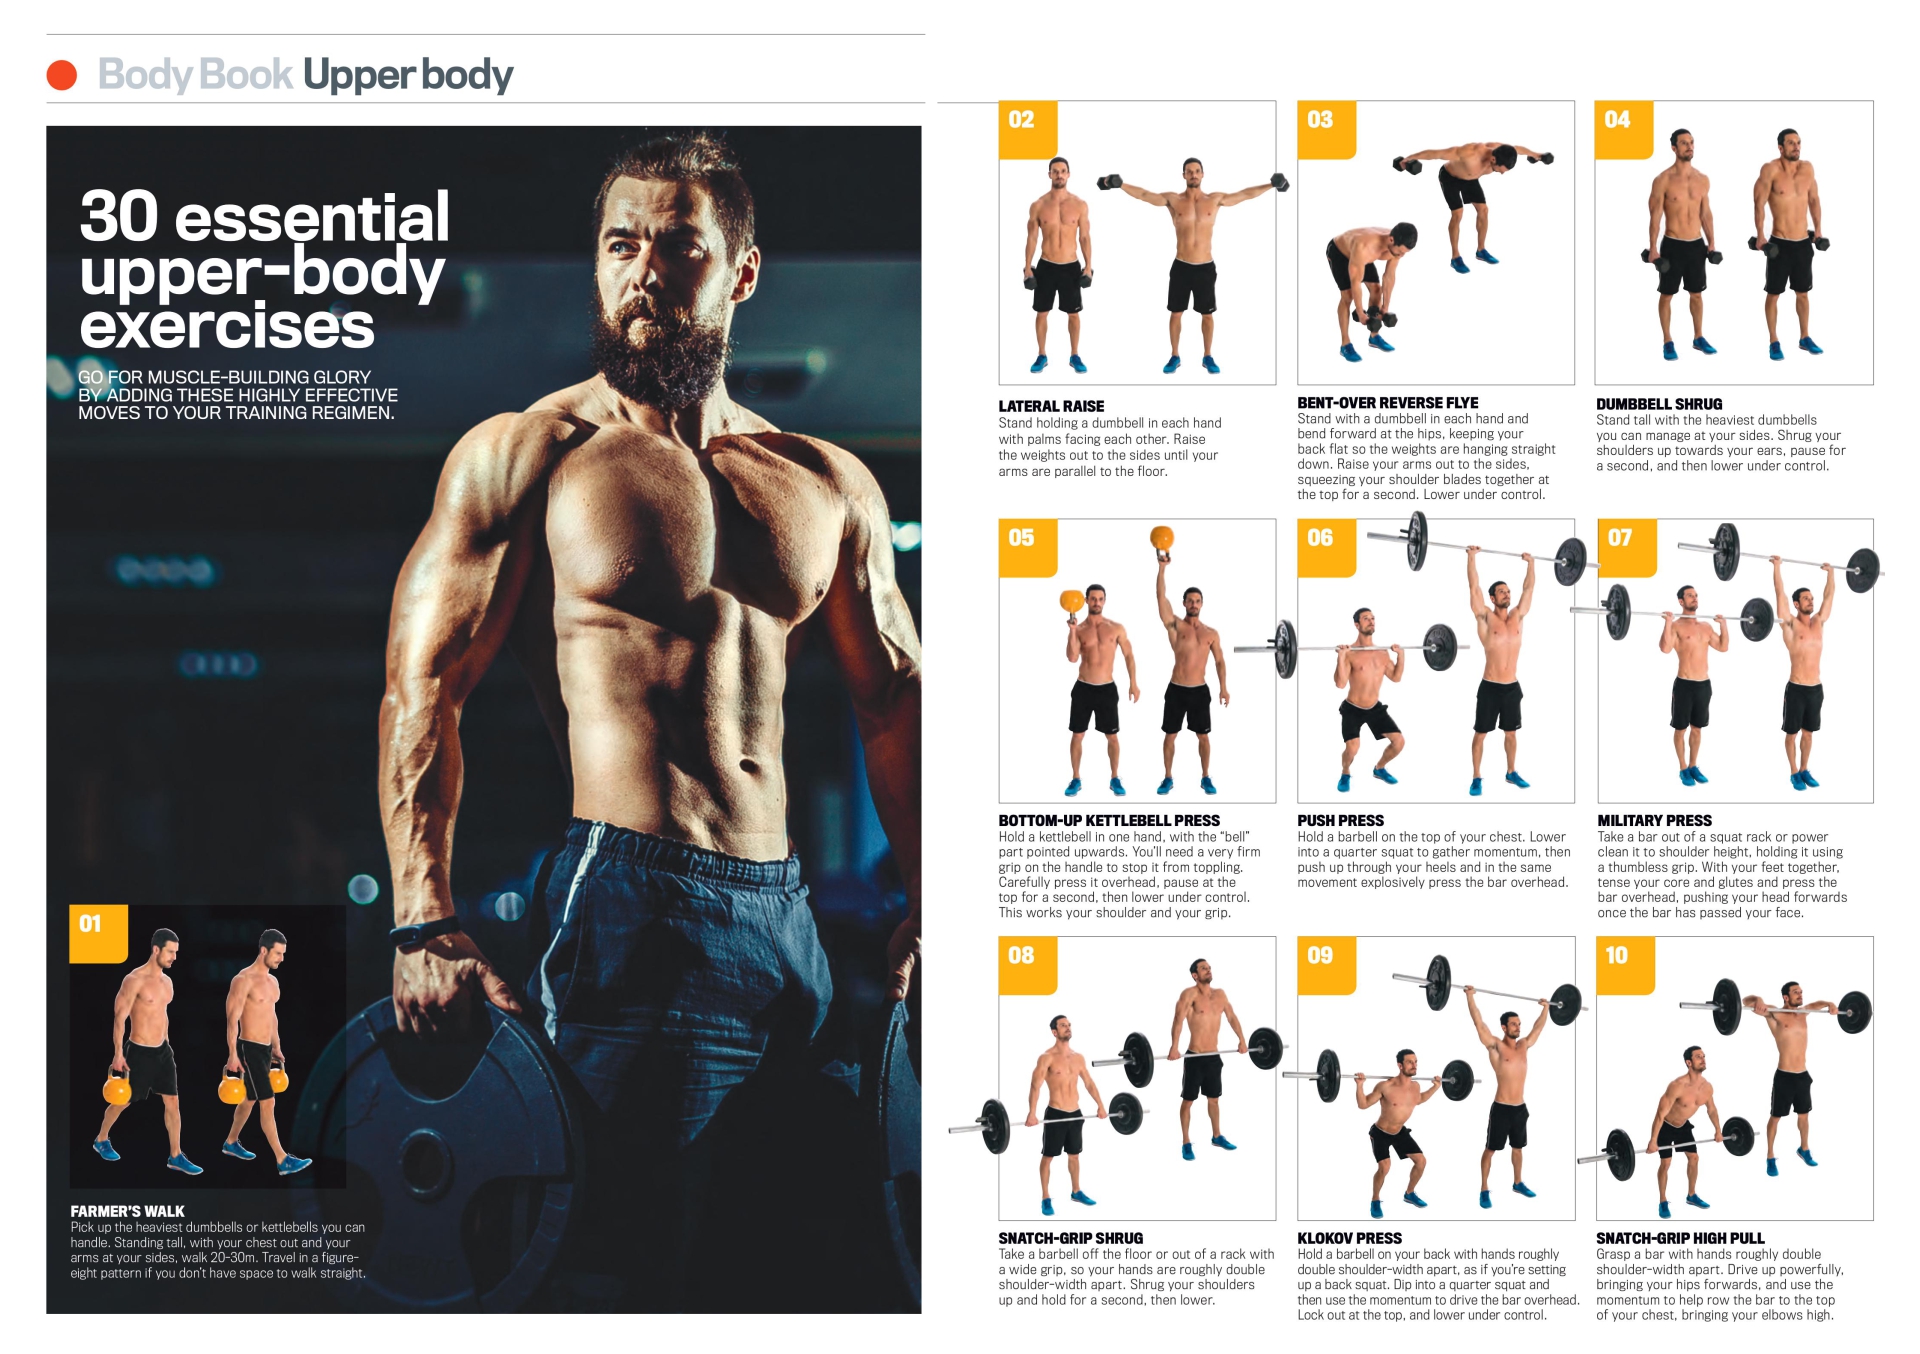 Printable Workout Charts for Men